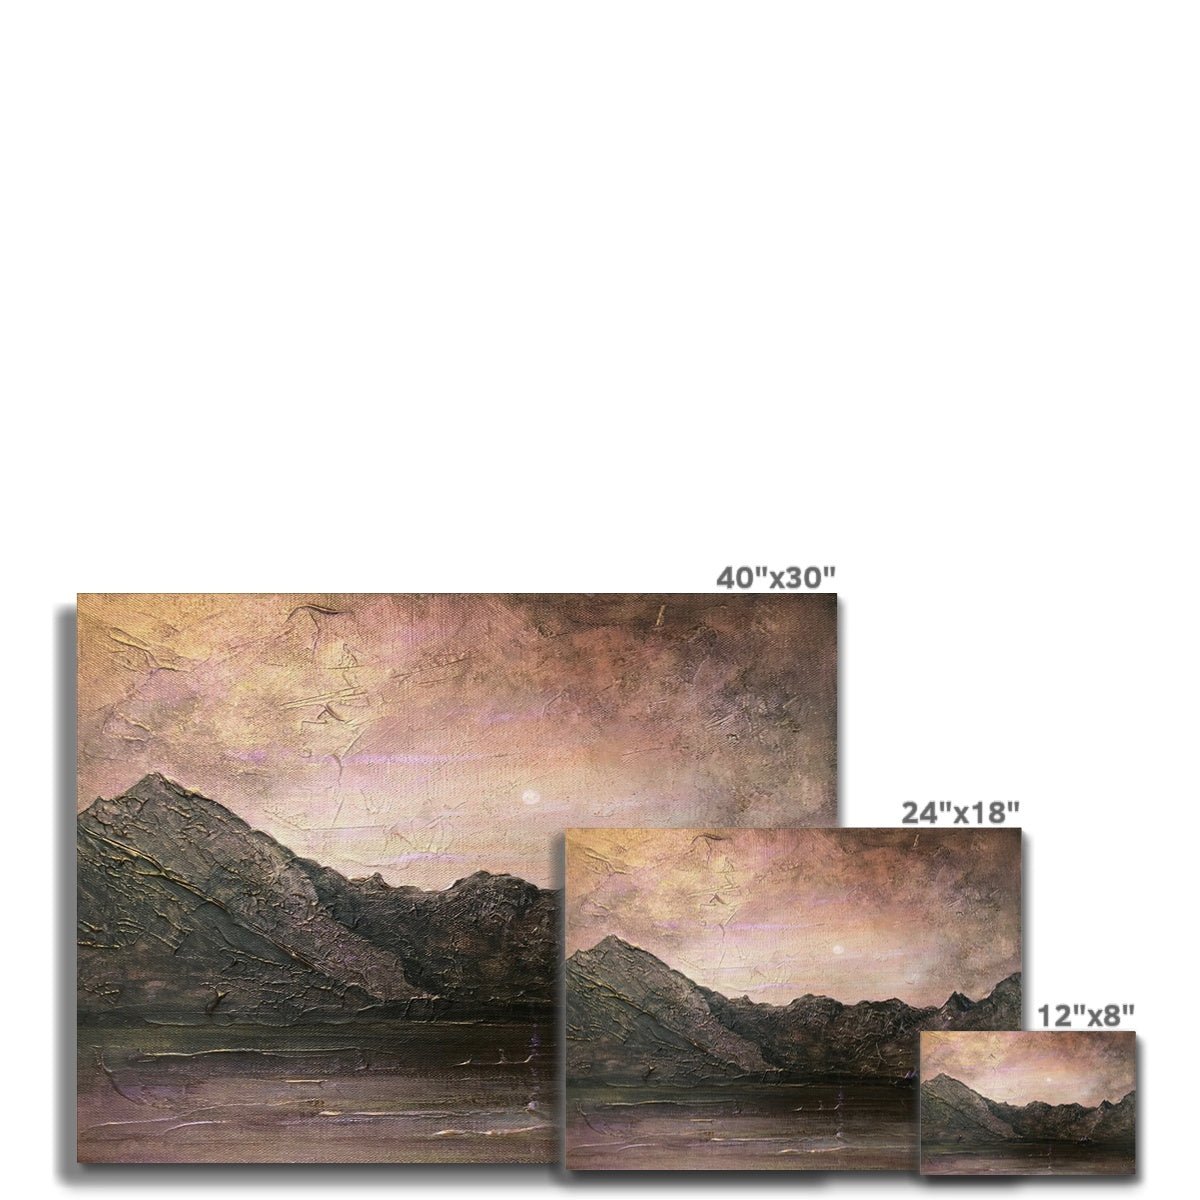 Dubh Ridge Moonlight Skye Painting | Canvas From Scotland-Contemporary Stretched Canvas Prints-Skye Art Gallery-Paintings, Prints, Homeware, Art Gifts From Scotland By Scottish Artist Kevin Hunter